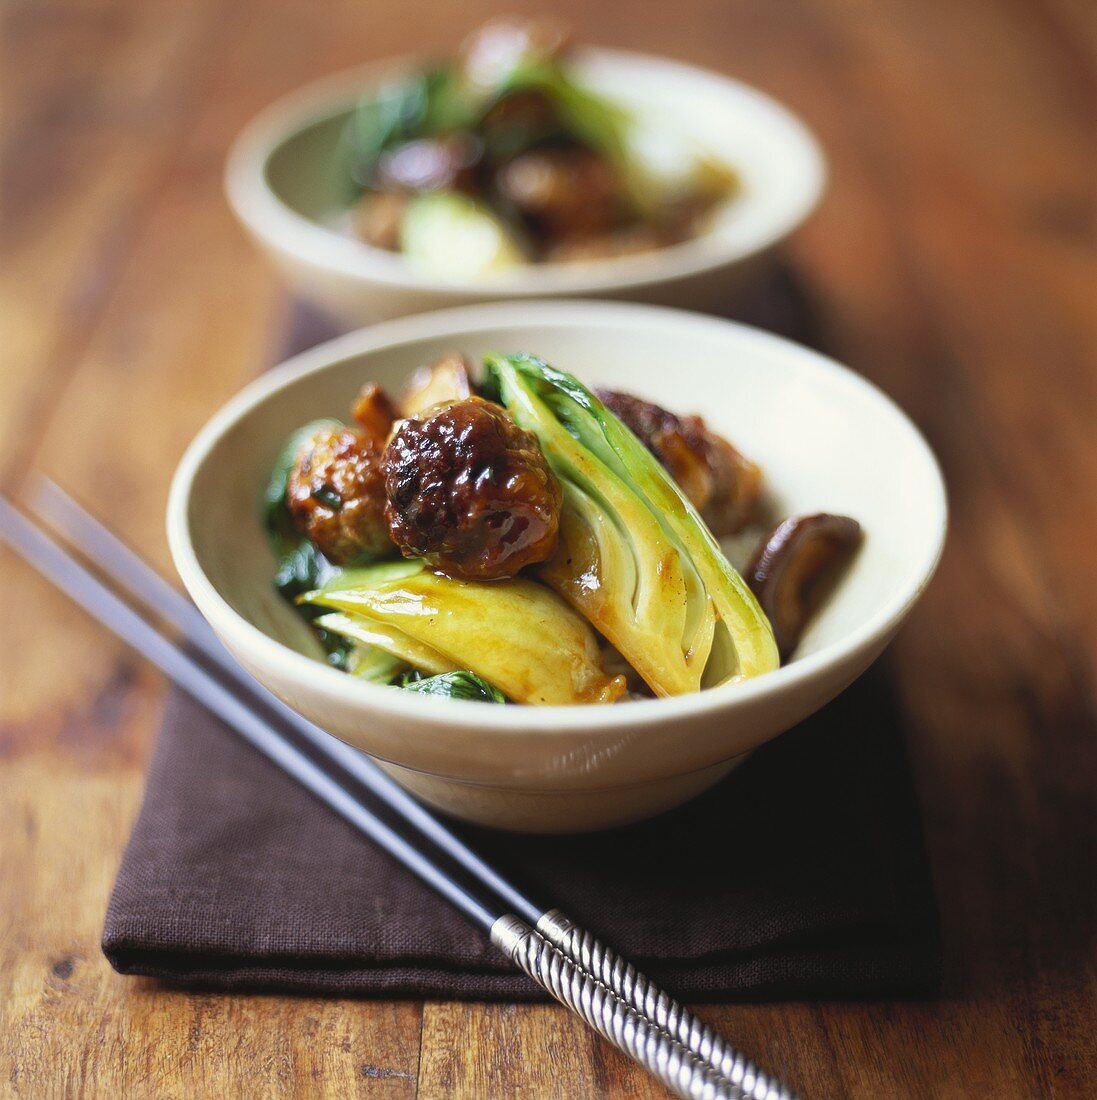 Sweet & sour meatballs with Asian vegetables & shiitake